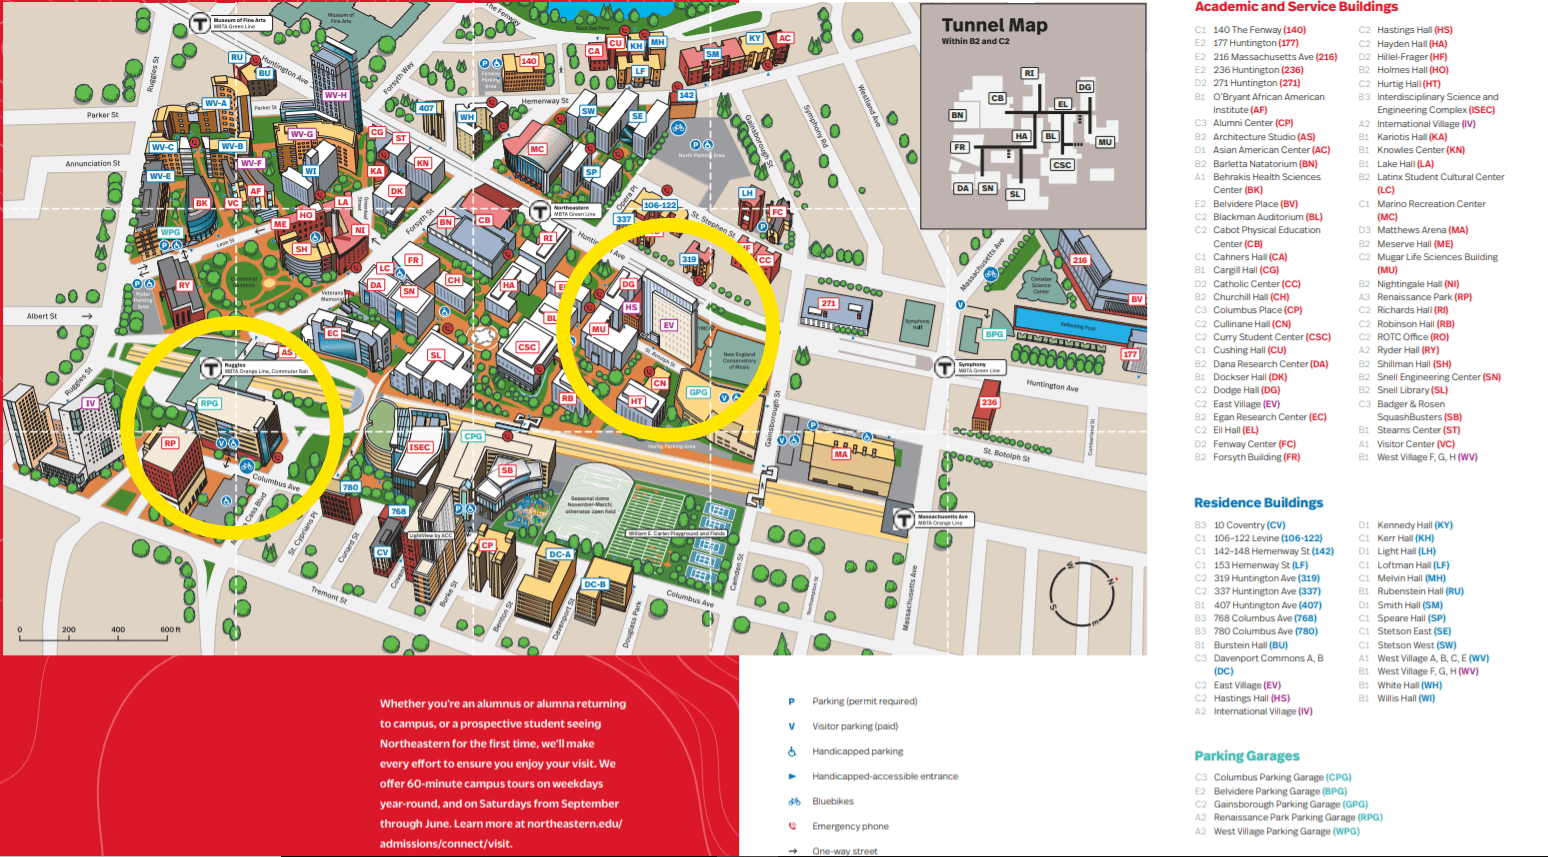 campus-map-of-northeastern-university-united-states-map